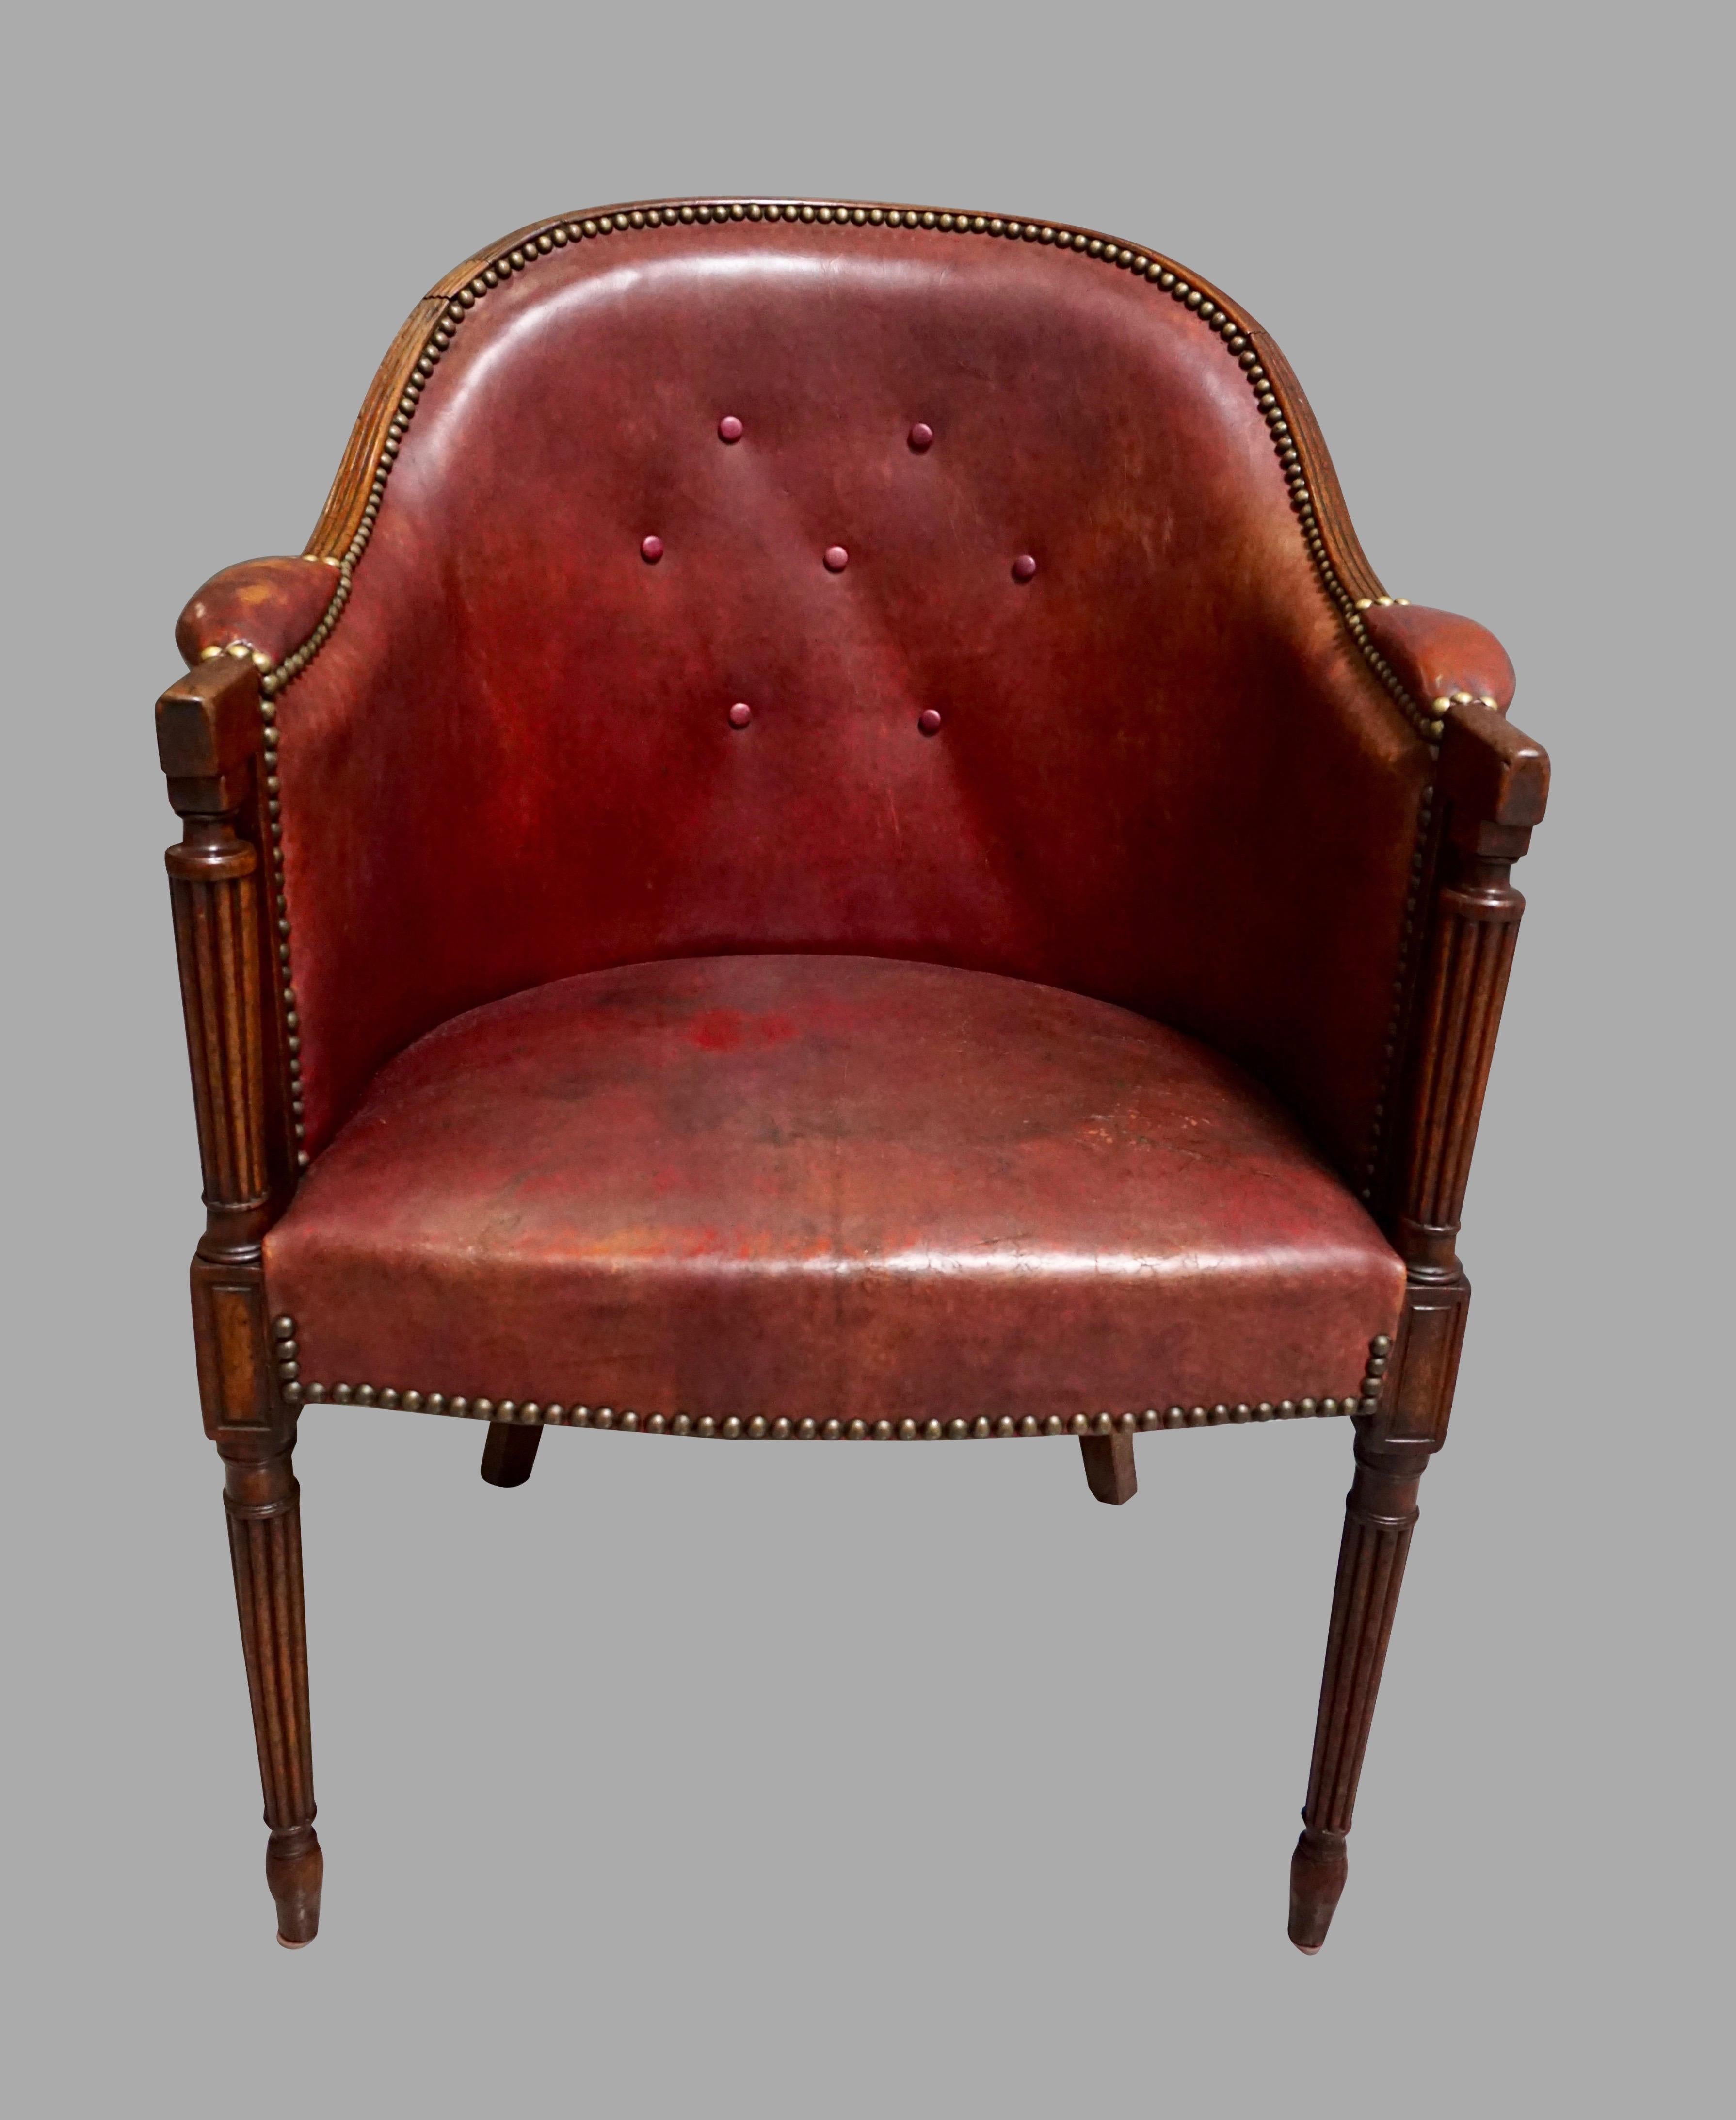 An English Regency mahogany reddish-brown leather upholstered tub chair with nailhead trim, the reeded crest rail above a tufted button back terminating in downswept columnar arms resting on cylindrical reeded legs ending in arrow feet. This chair